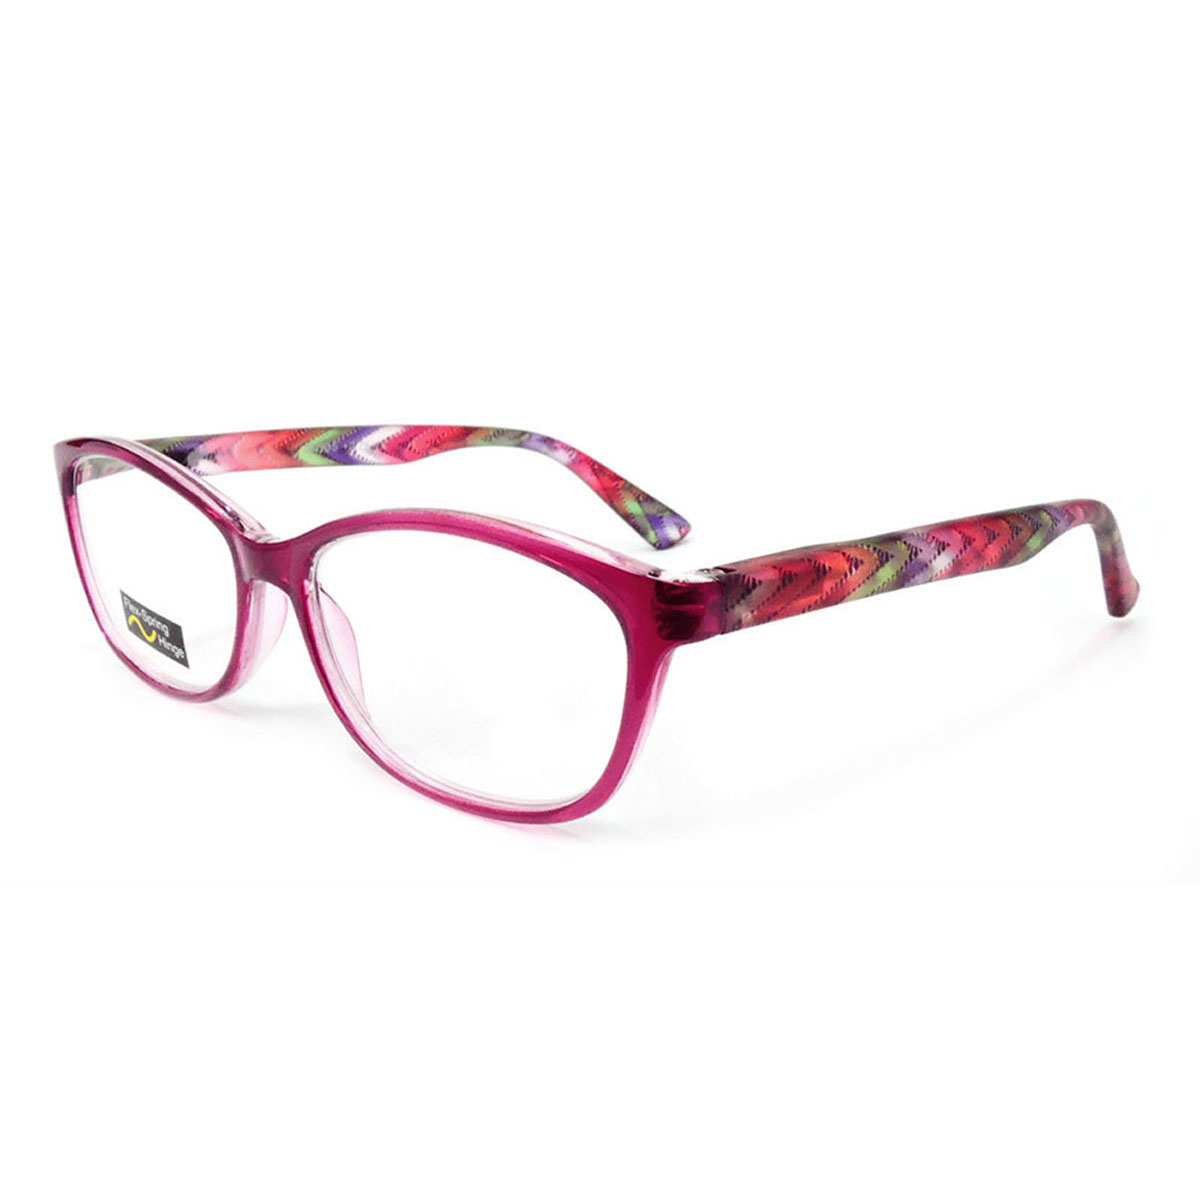 Classic Frame Reading Glasses Colorful Arms Retro Vintage Style - Red, +1.75